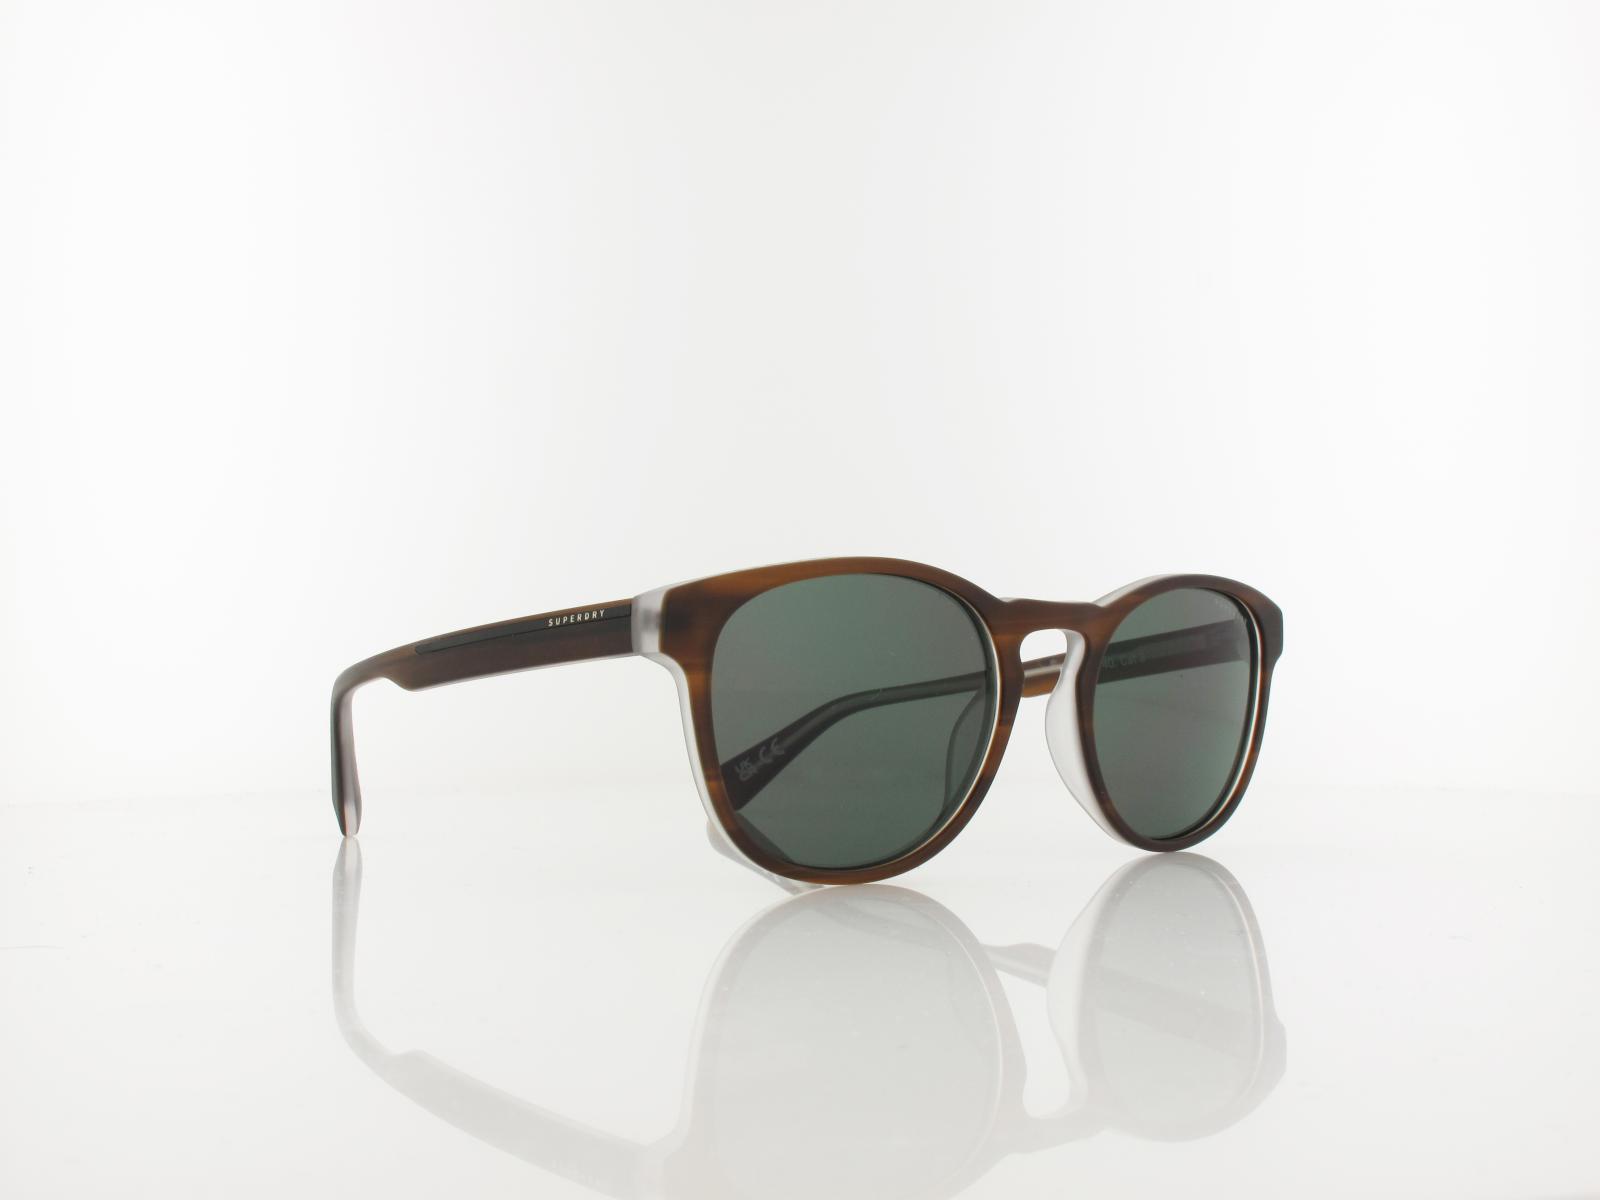 Superdry | 5030 101 53 | brown / solid green